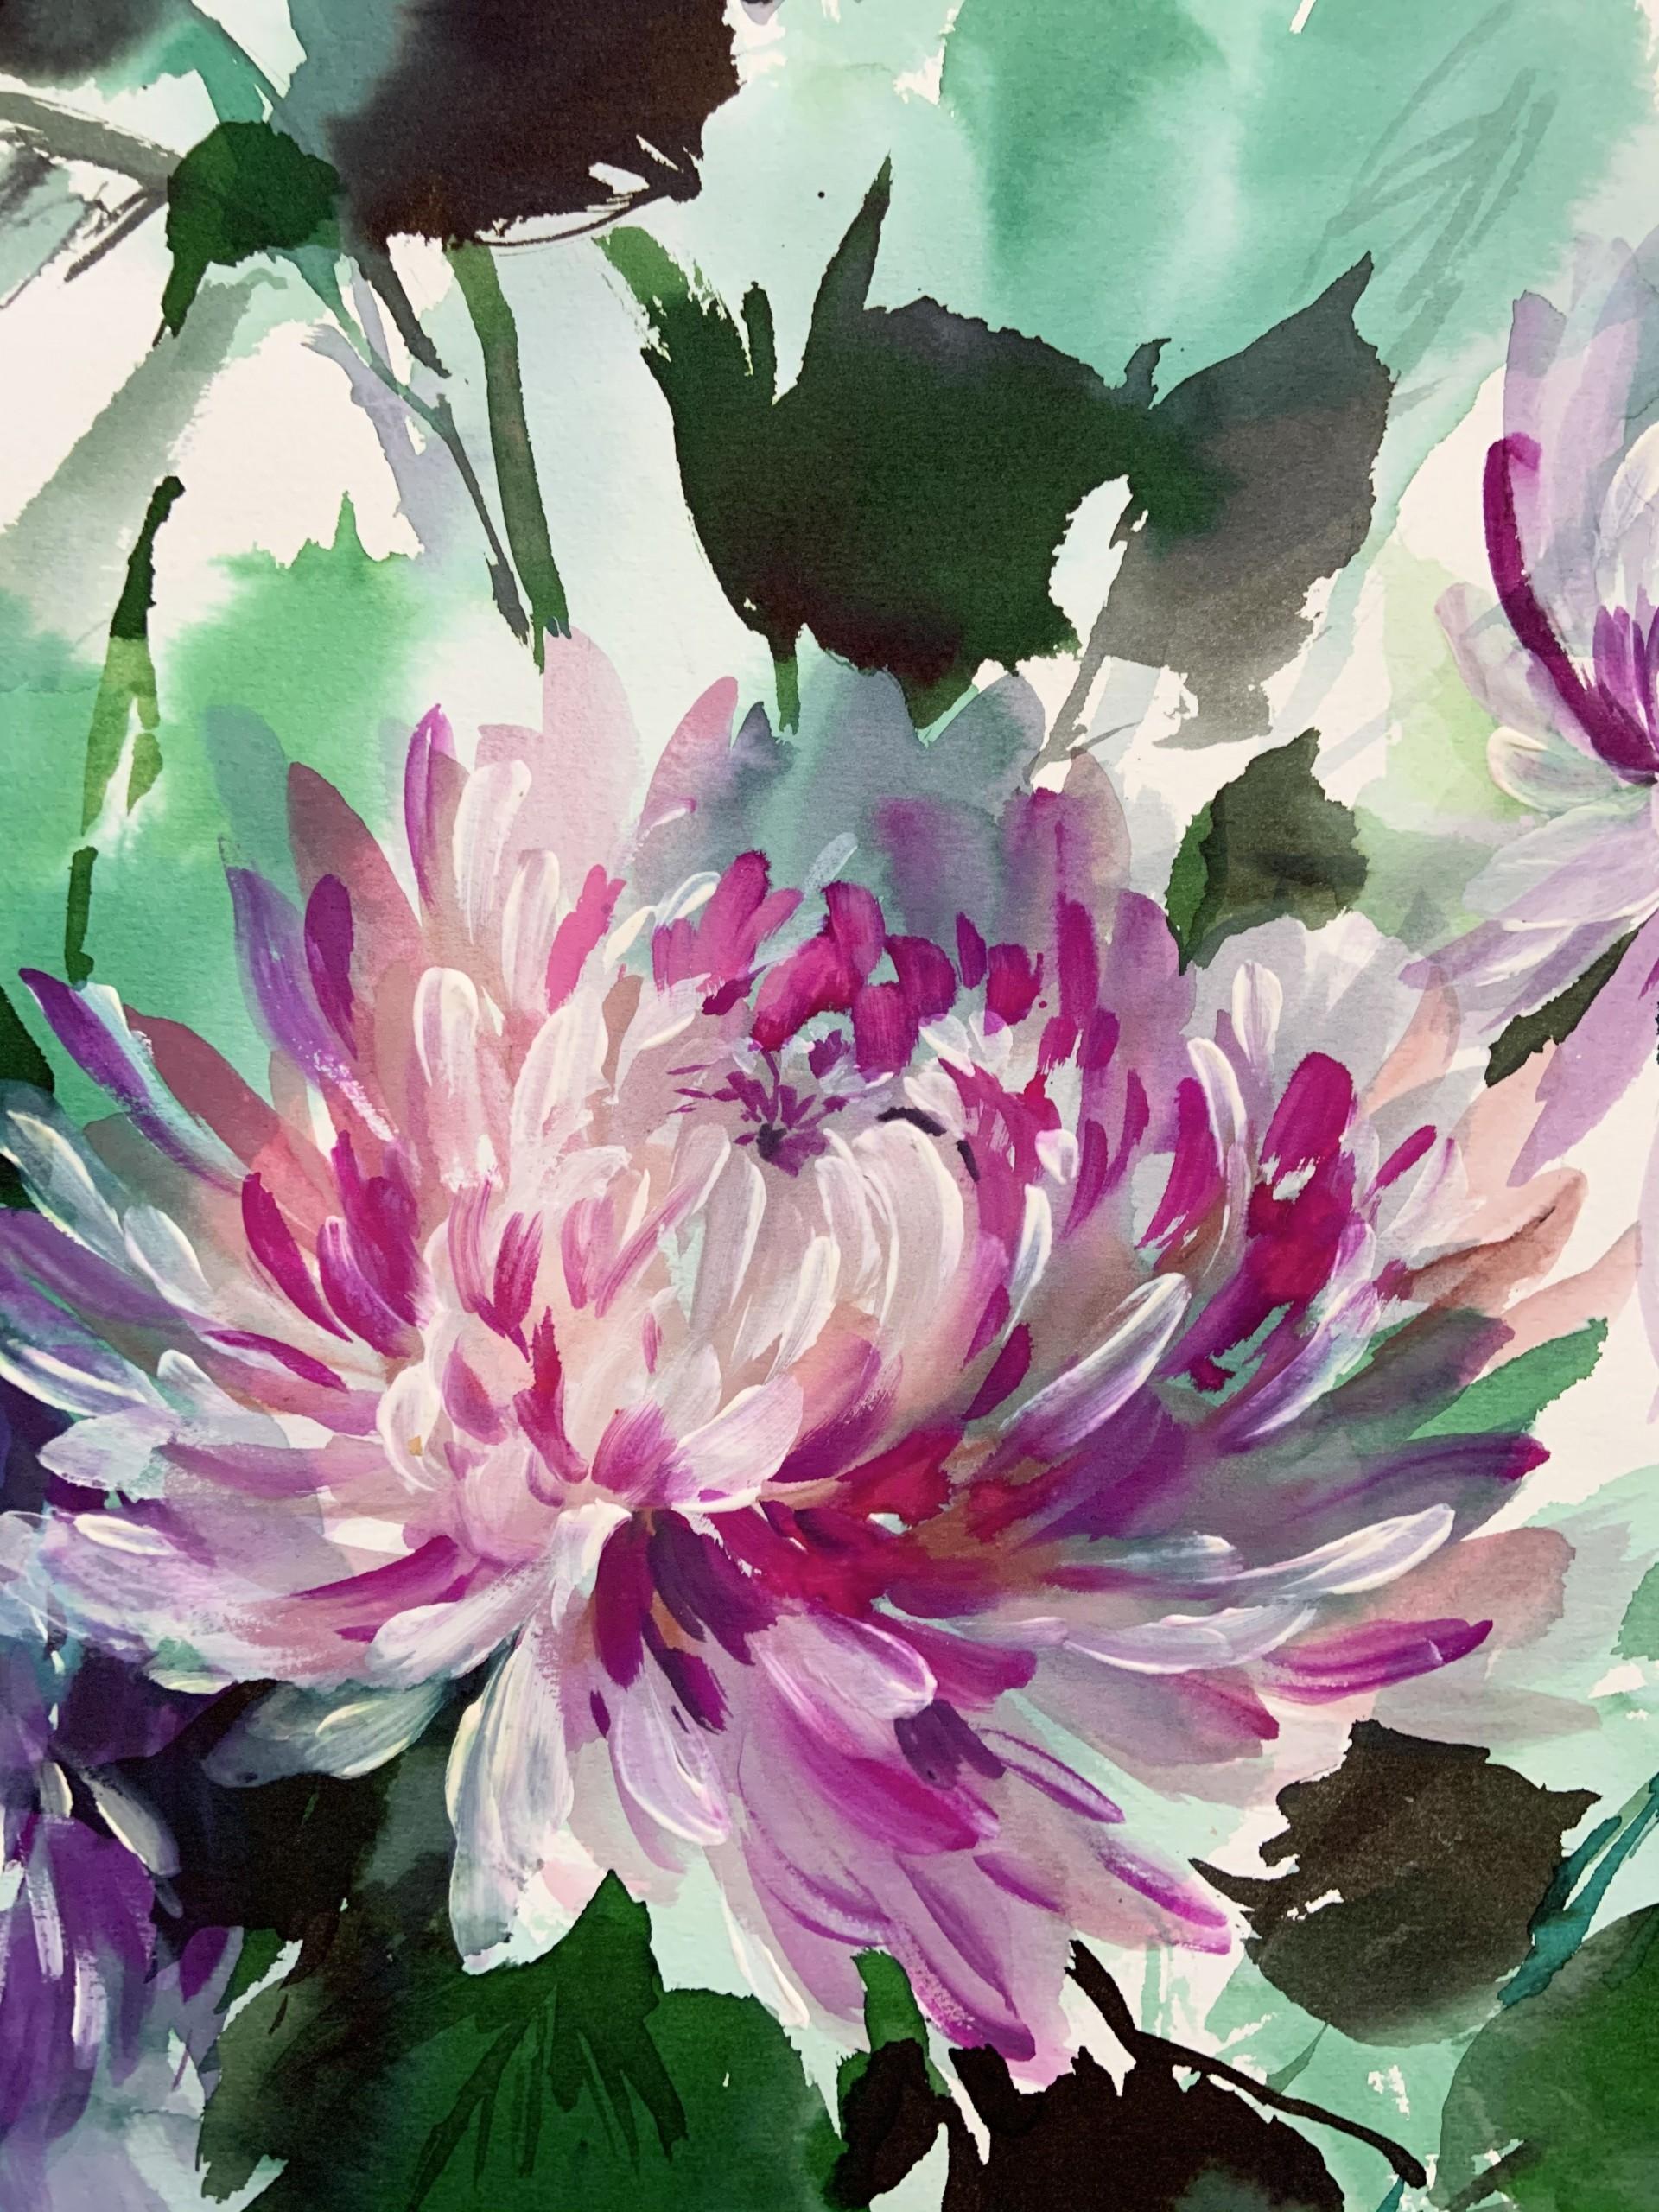 Drenched Chrysanthemums By Jo Haran [2020]

original
Watercolour, gouache and gesso
Image size: H:73 cm x W:54 cm
Complete Size of Unframed Work: H:76 cm x W:56 cm x D:0.001cm
Sold Unframed
Please note that insitu images are purely an indication of